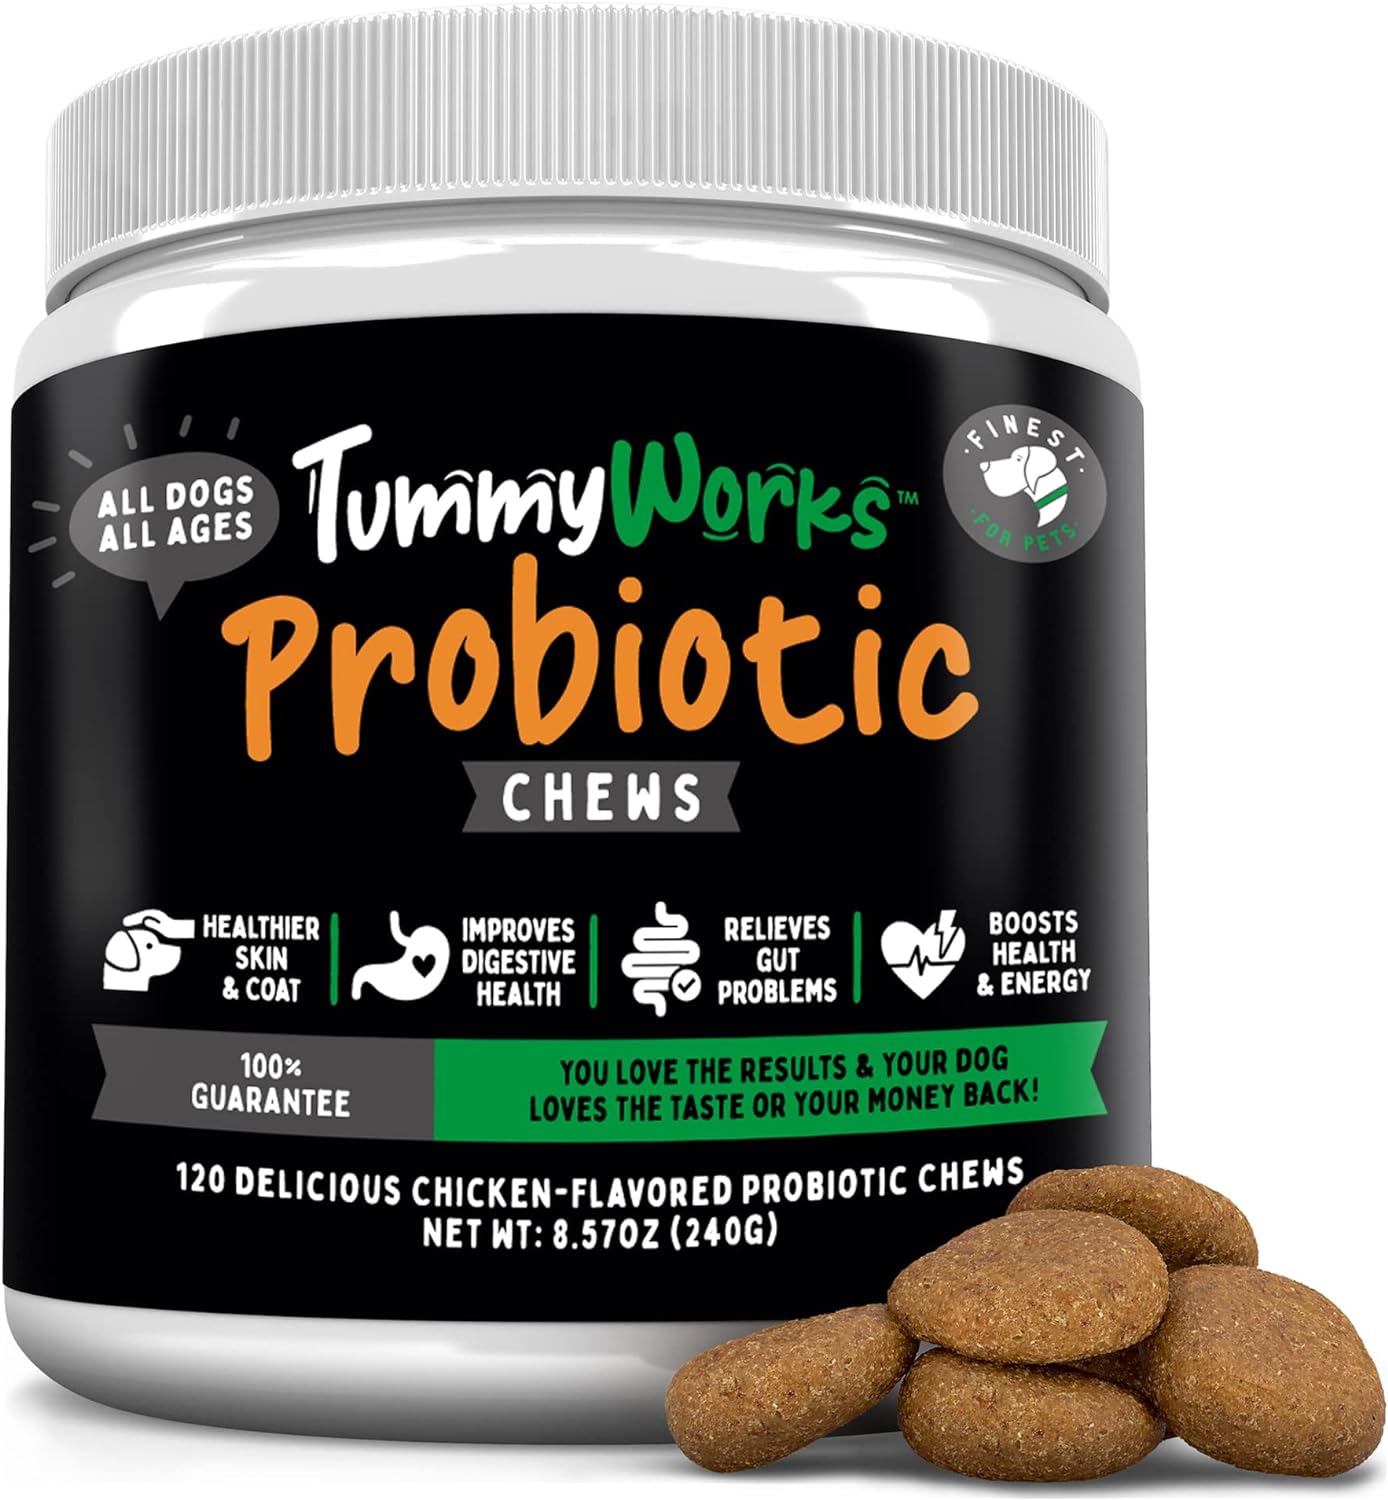 TummyWorks Probiotic Soft Chews for Dogs. Probiotics for Gut Flora, Digestive Health, Immune Support, Diarrhea, Itching